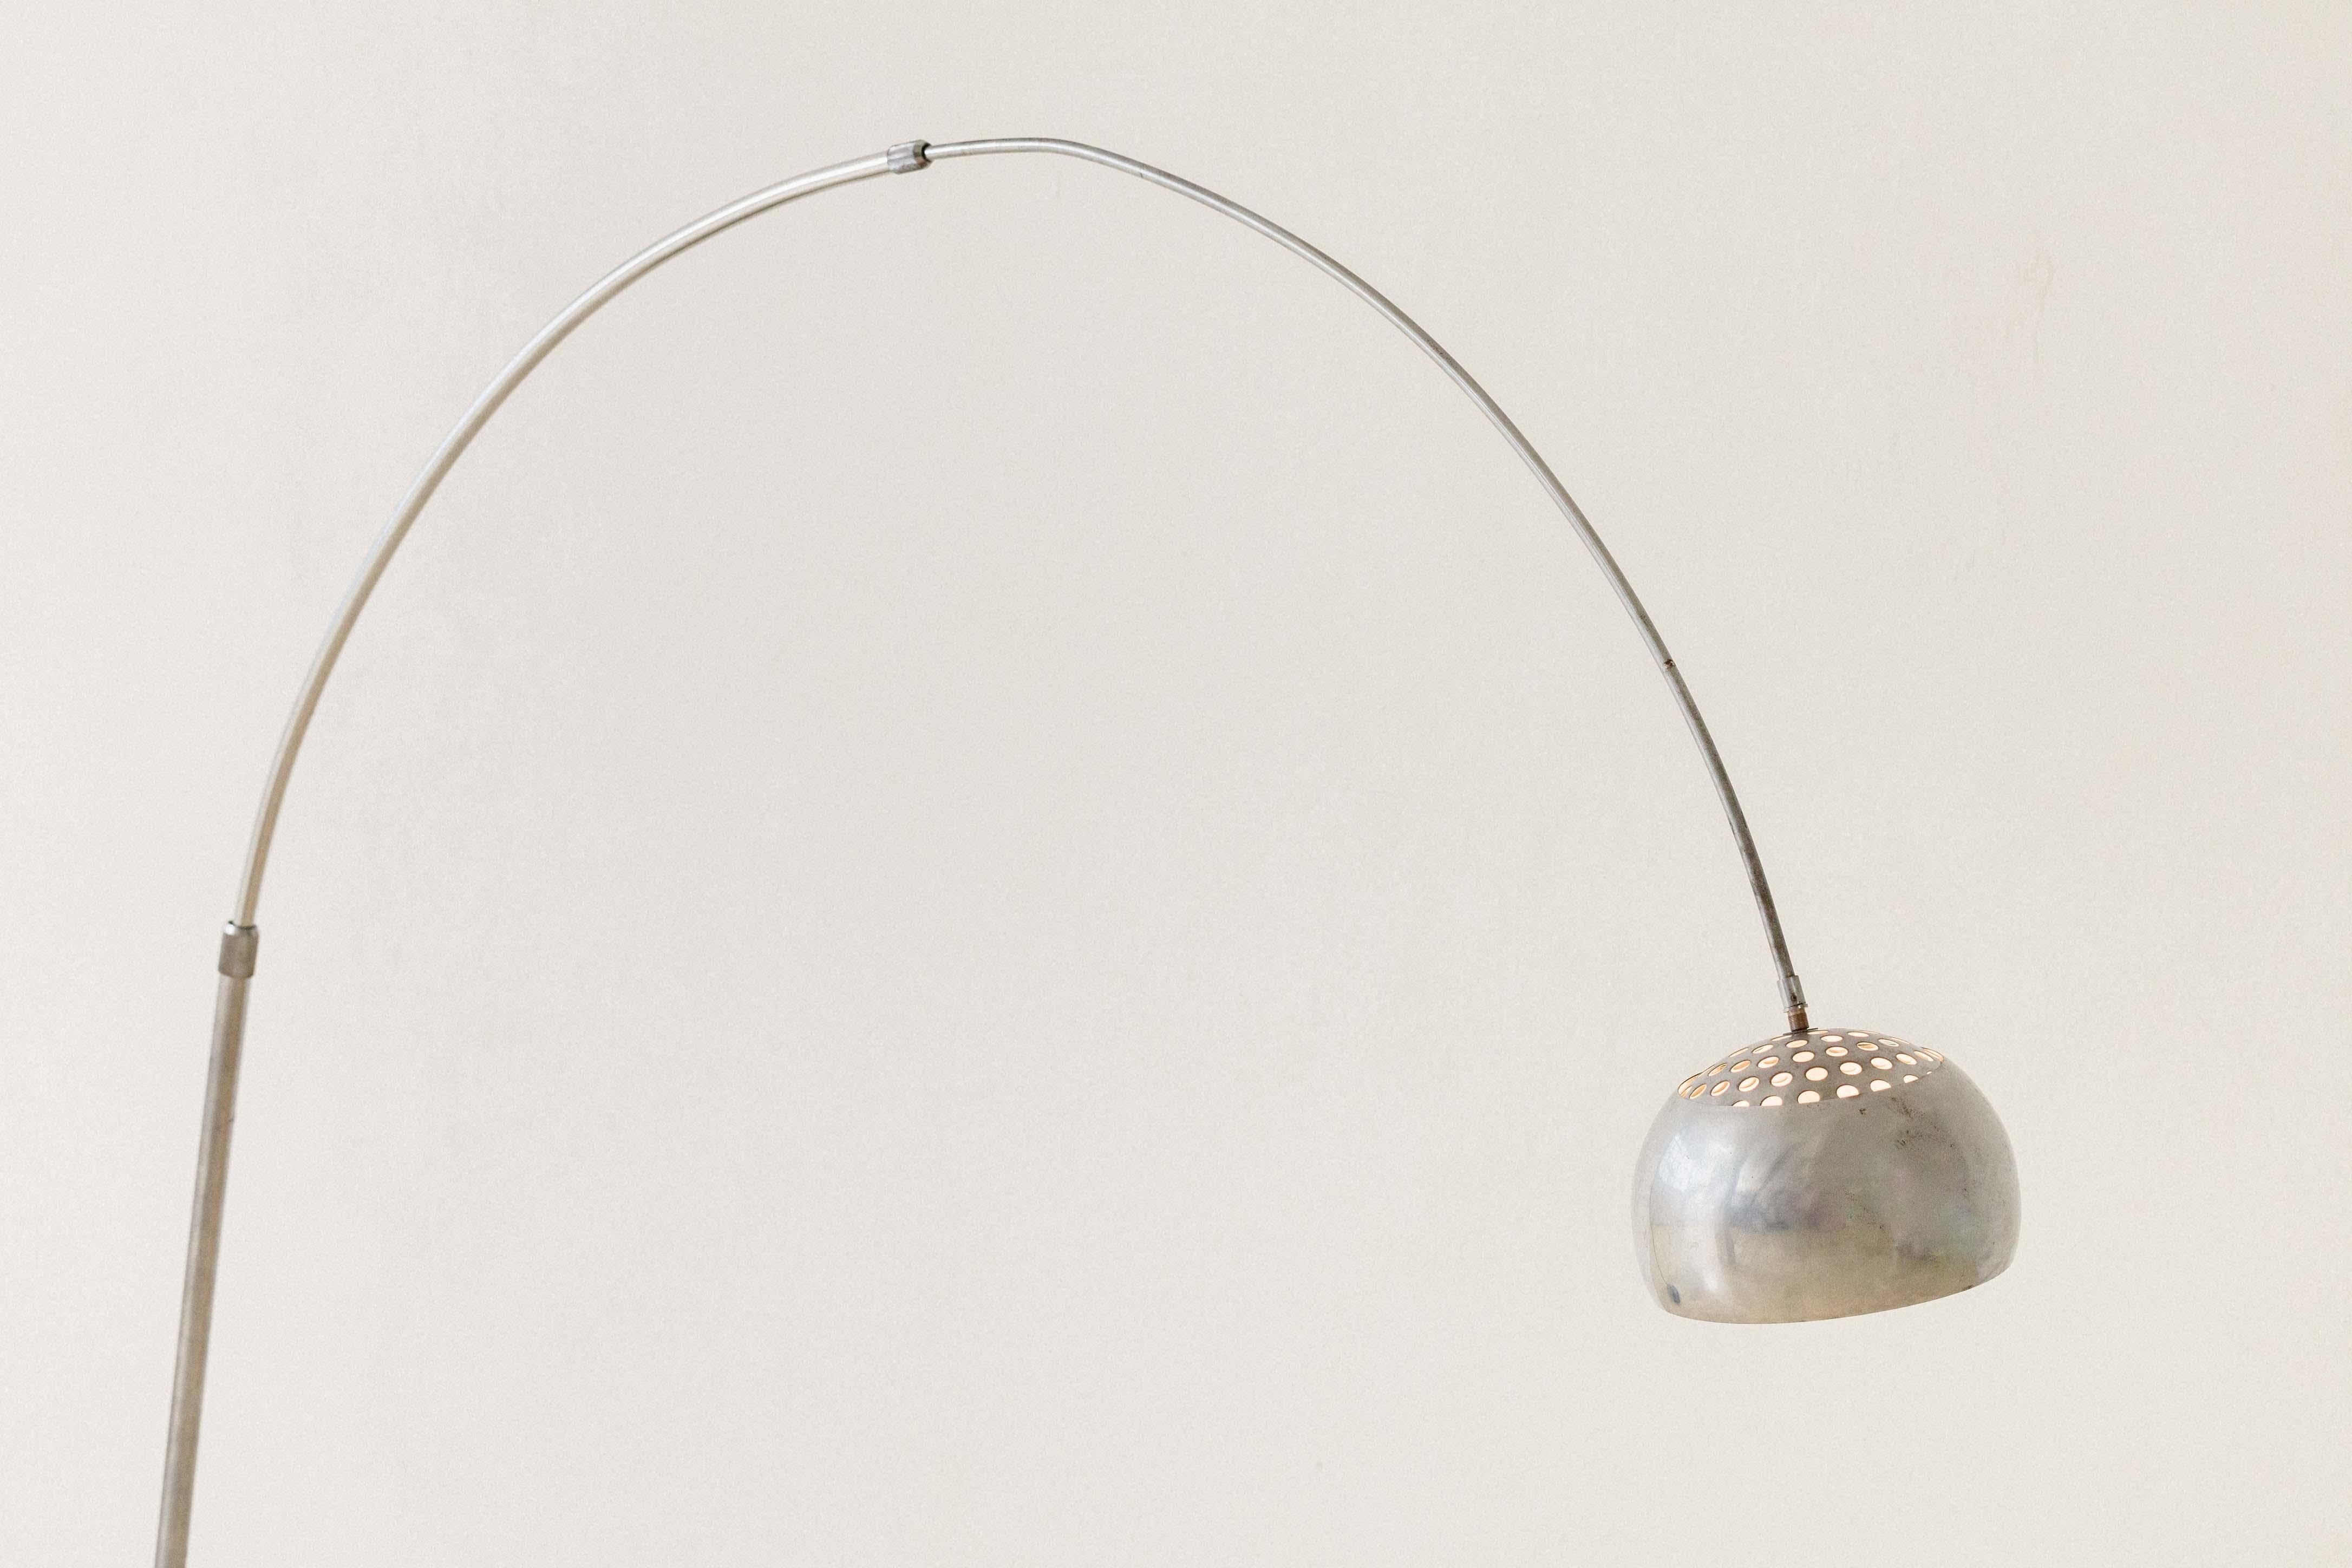 Mid-Century Modern Floor Lamp, 1960s, Inspired by Achille & Pier Giacomo Castiglioni Iconic Arco For Sale